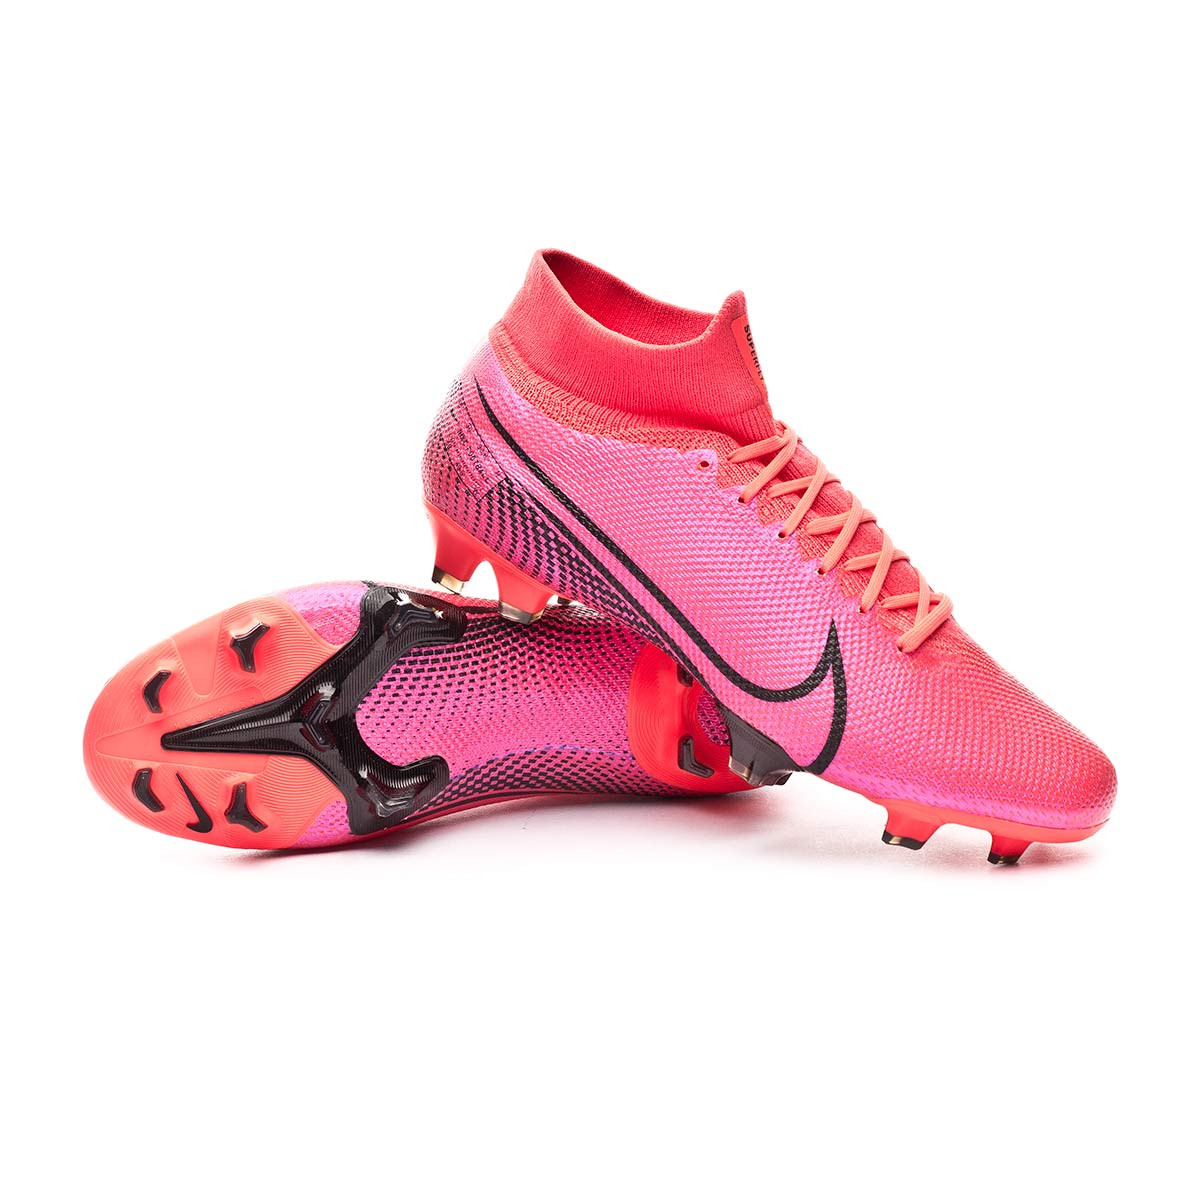 mercurial superfly 7 pro